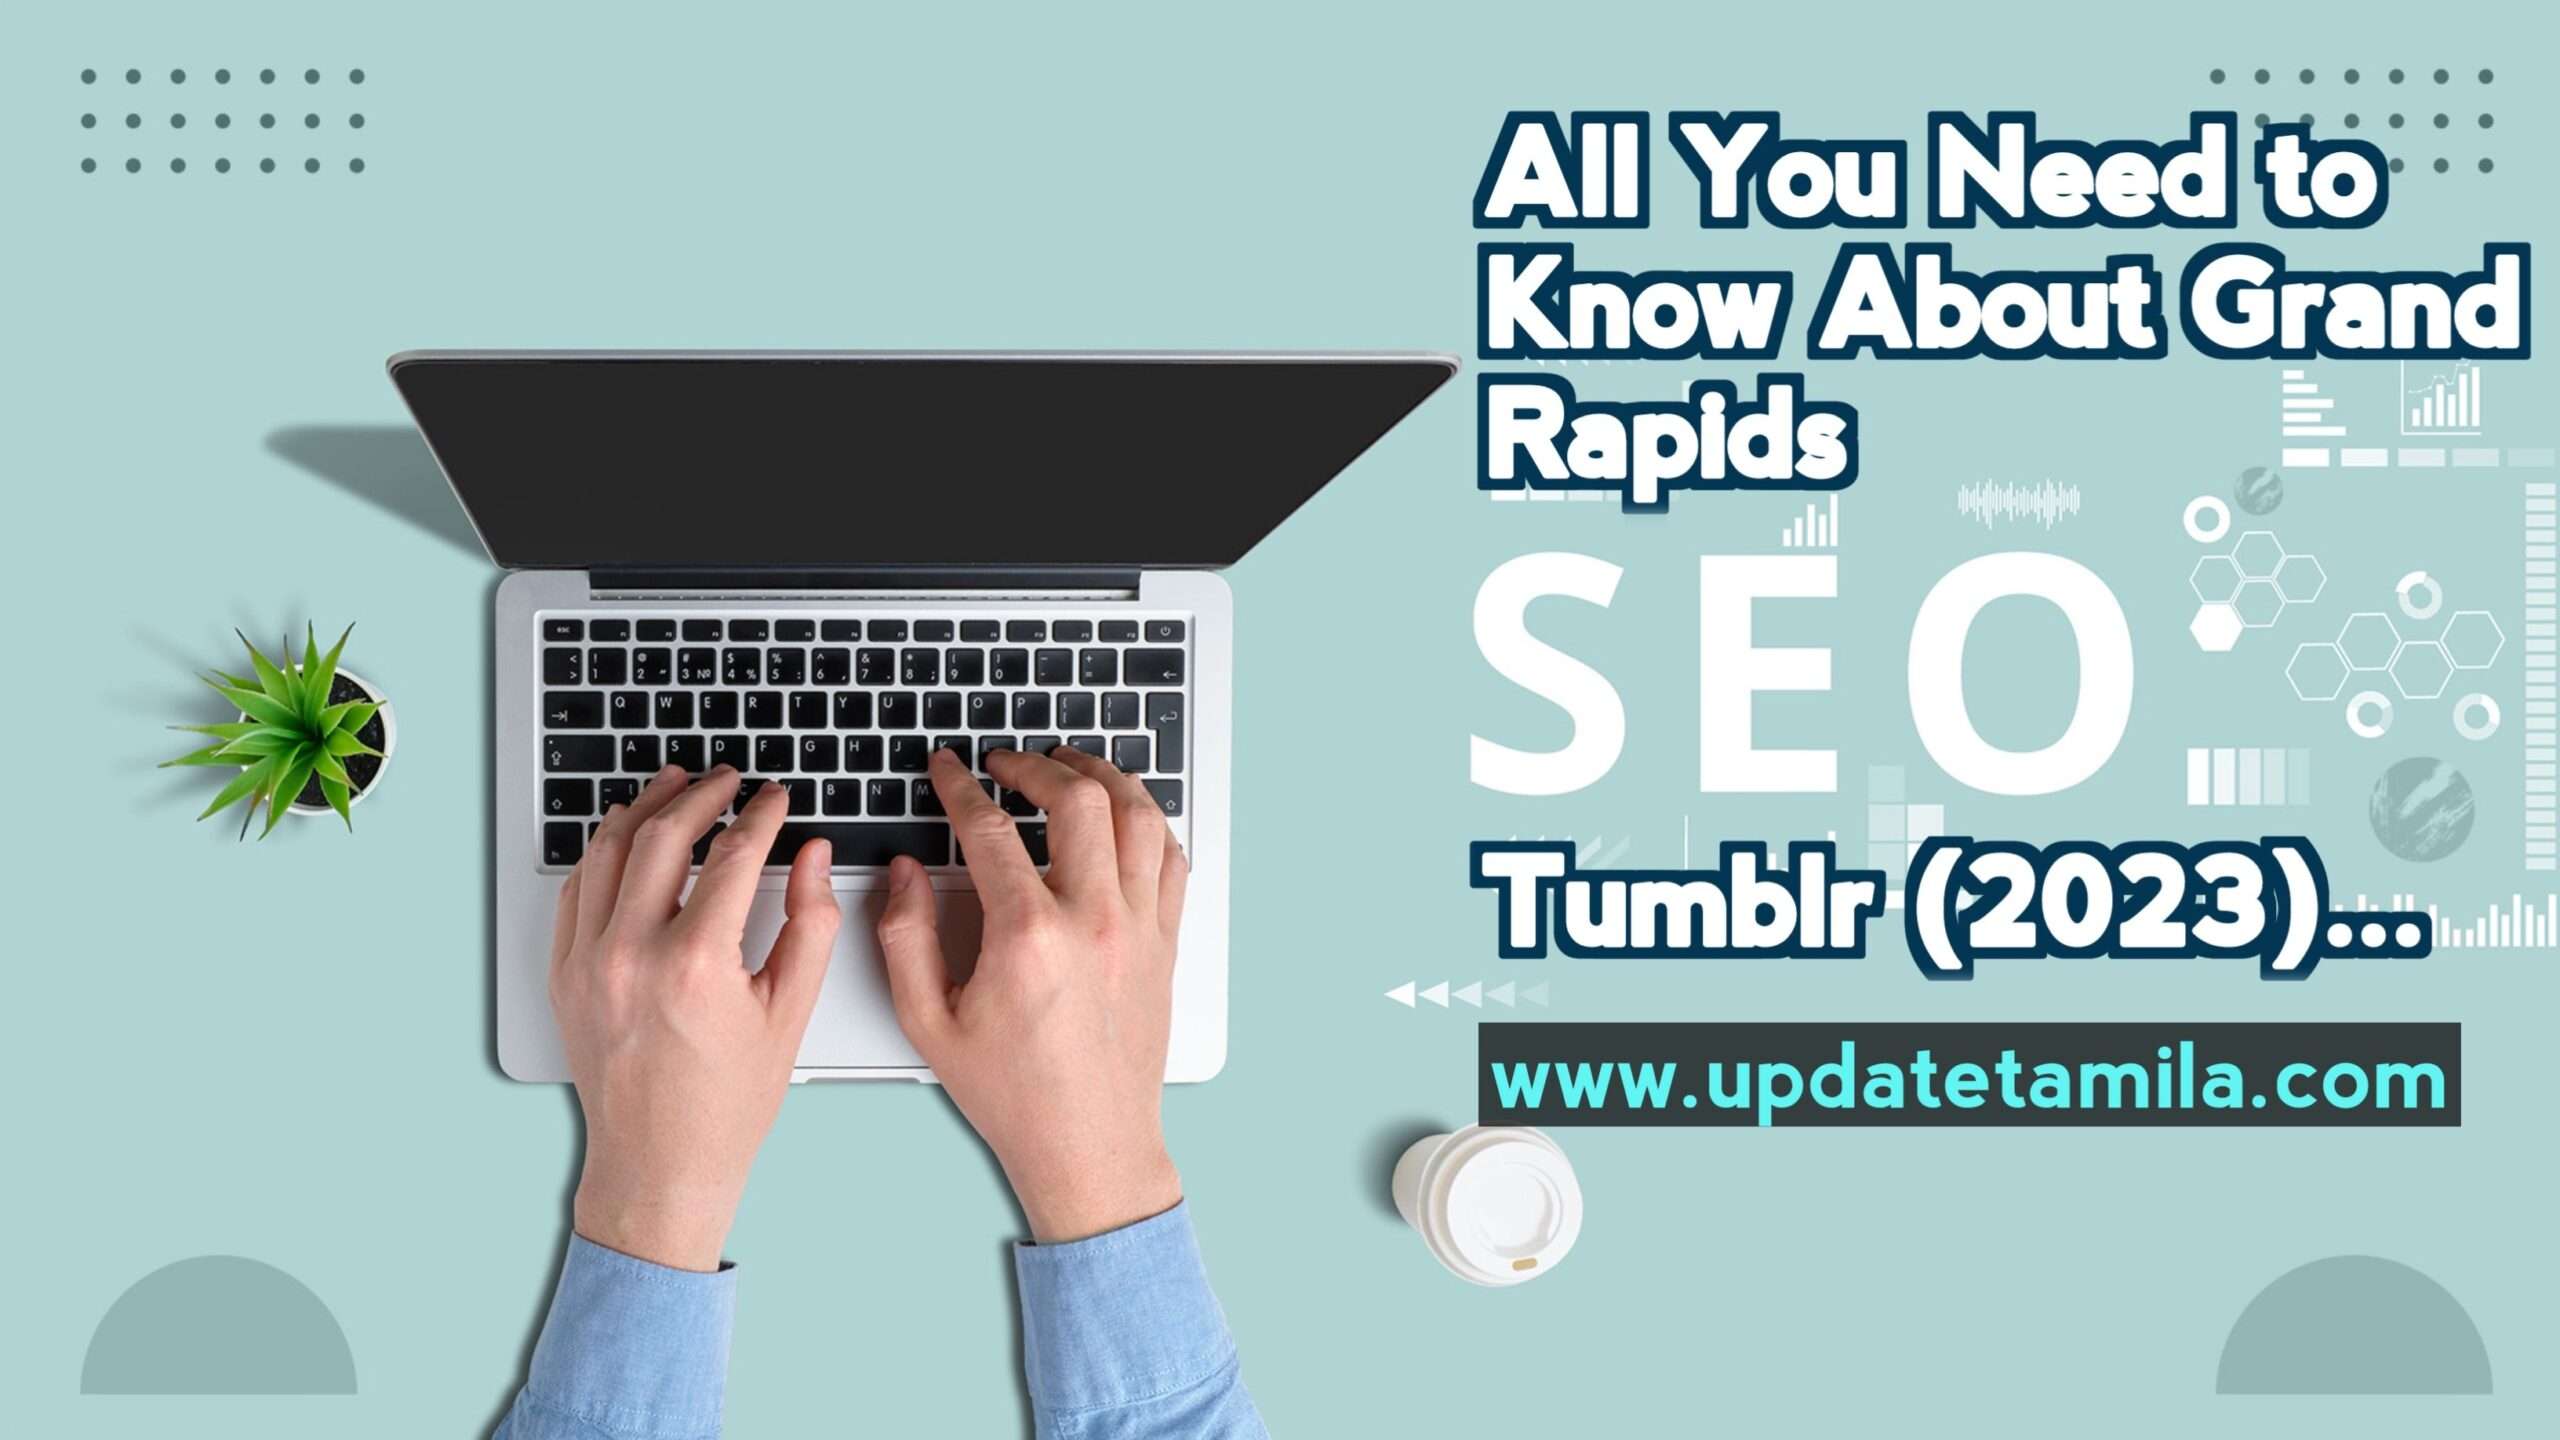 All you need to know about Grand Rapids SEO Tumblr (2023)…